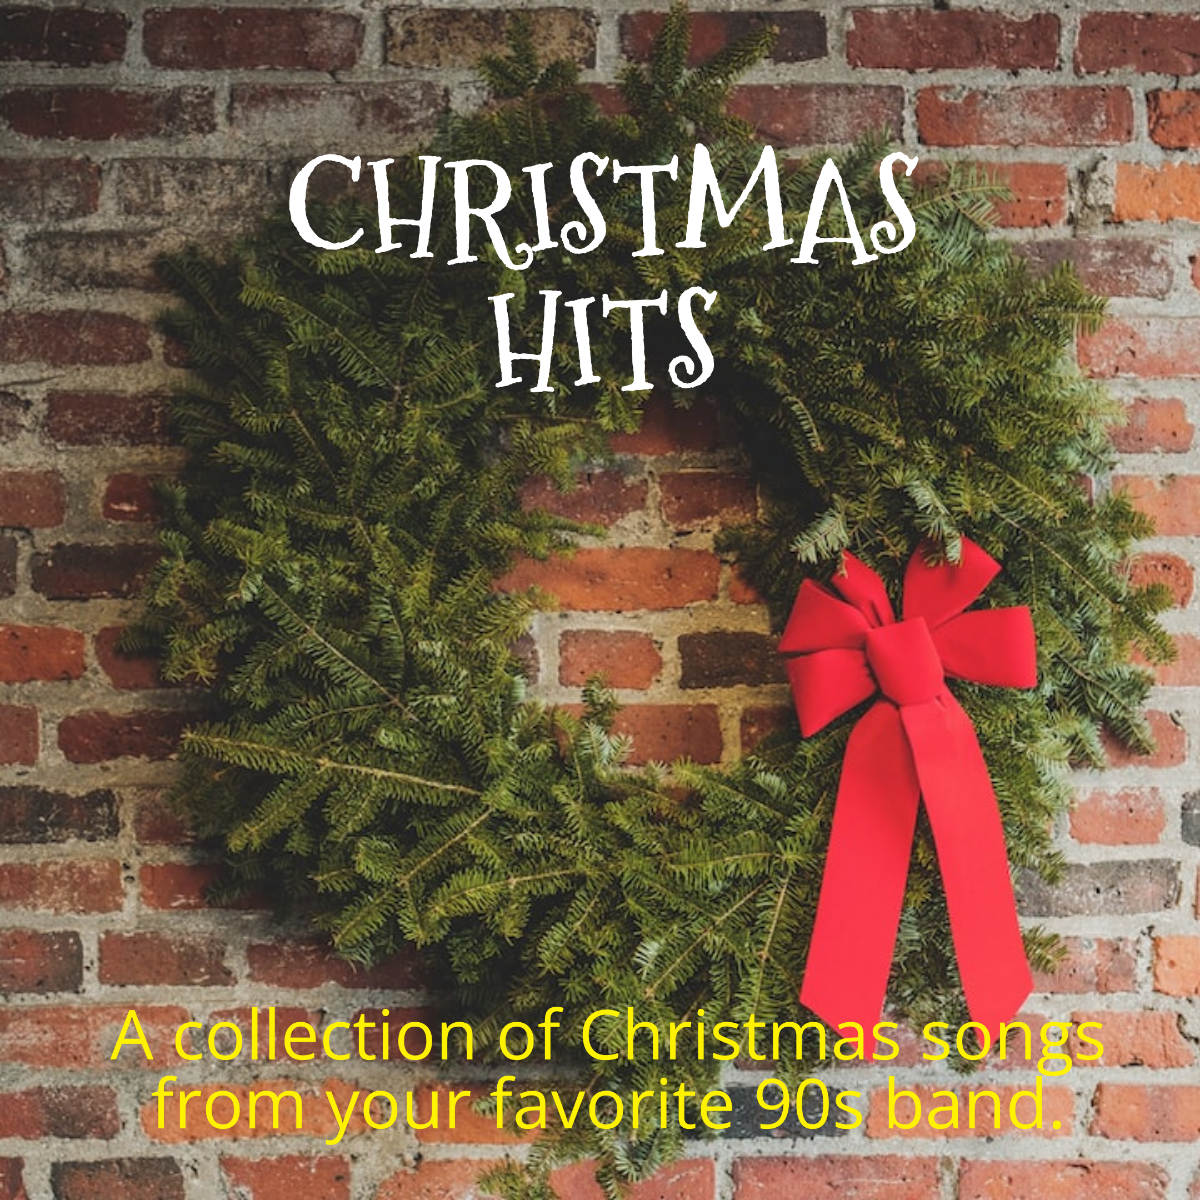 Simple Holiday/Festive/Celebration Playlist Cover Template